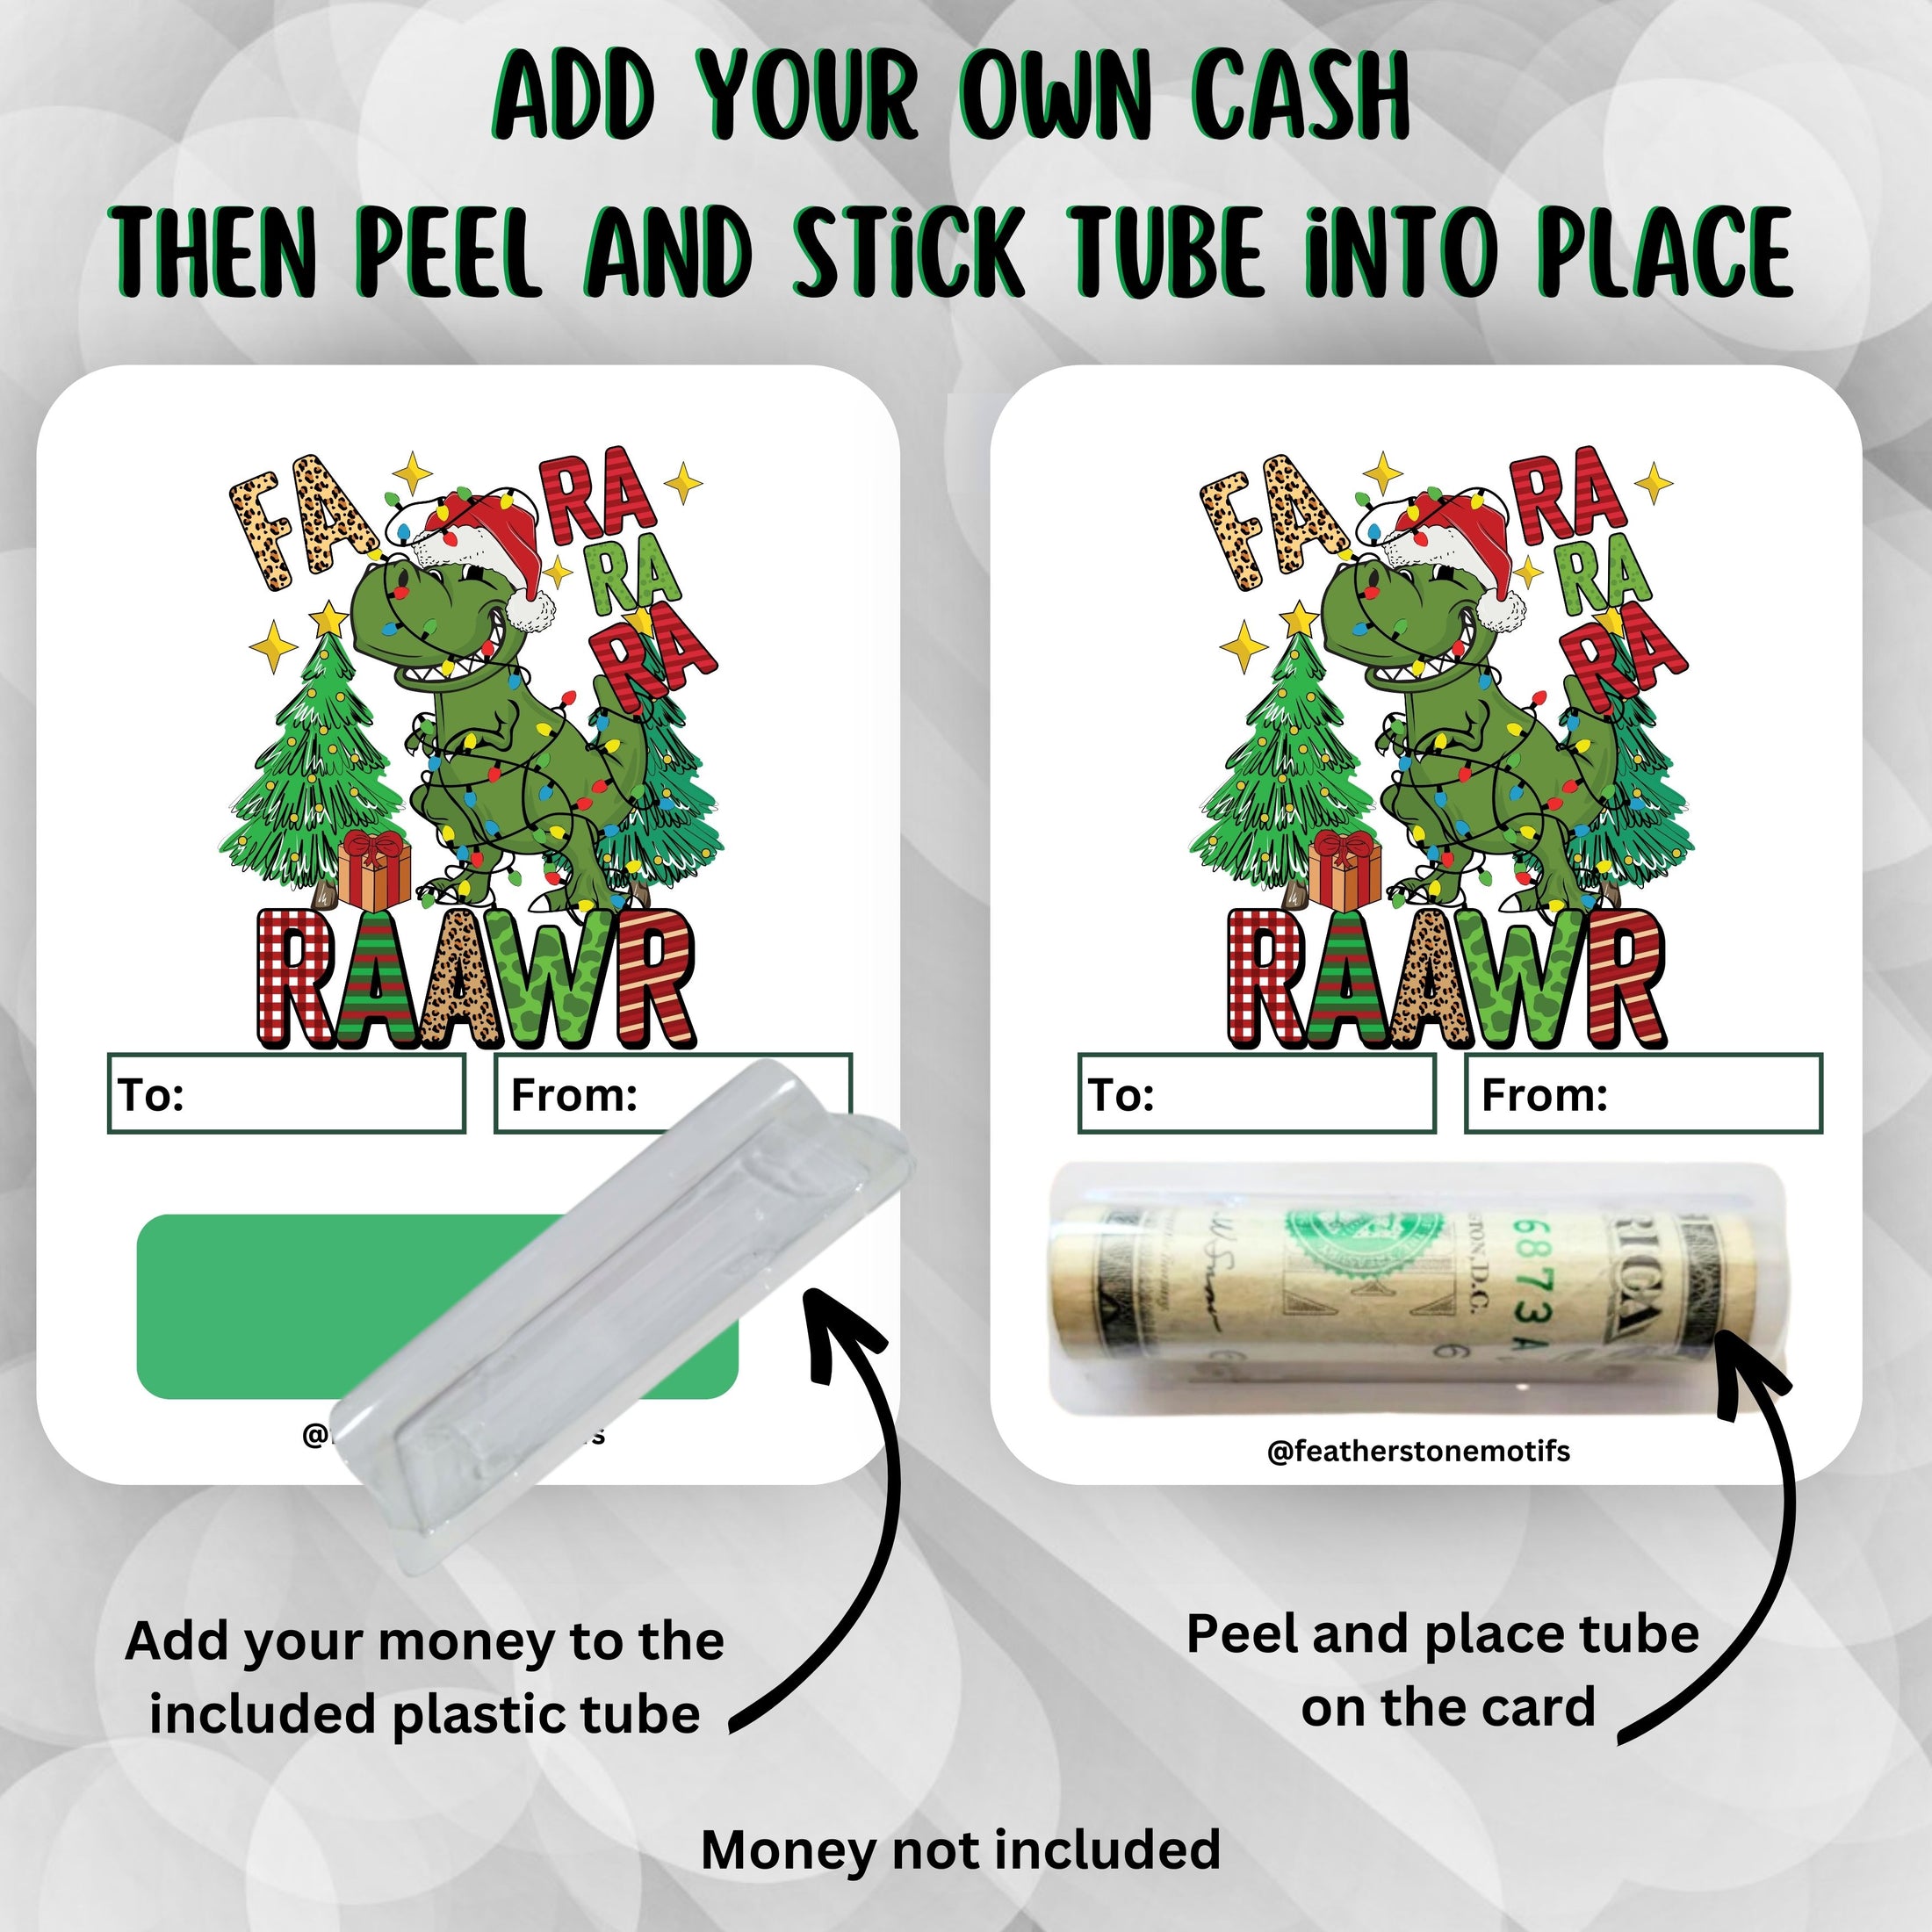 This image shows how to attach the money tube to the Fa Ra Raawr Money Card.